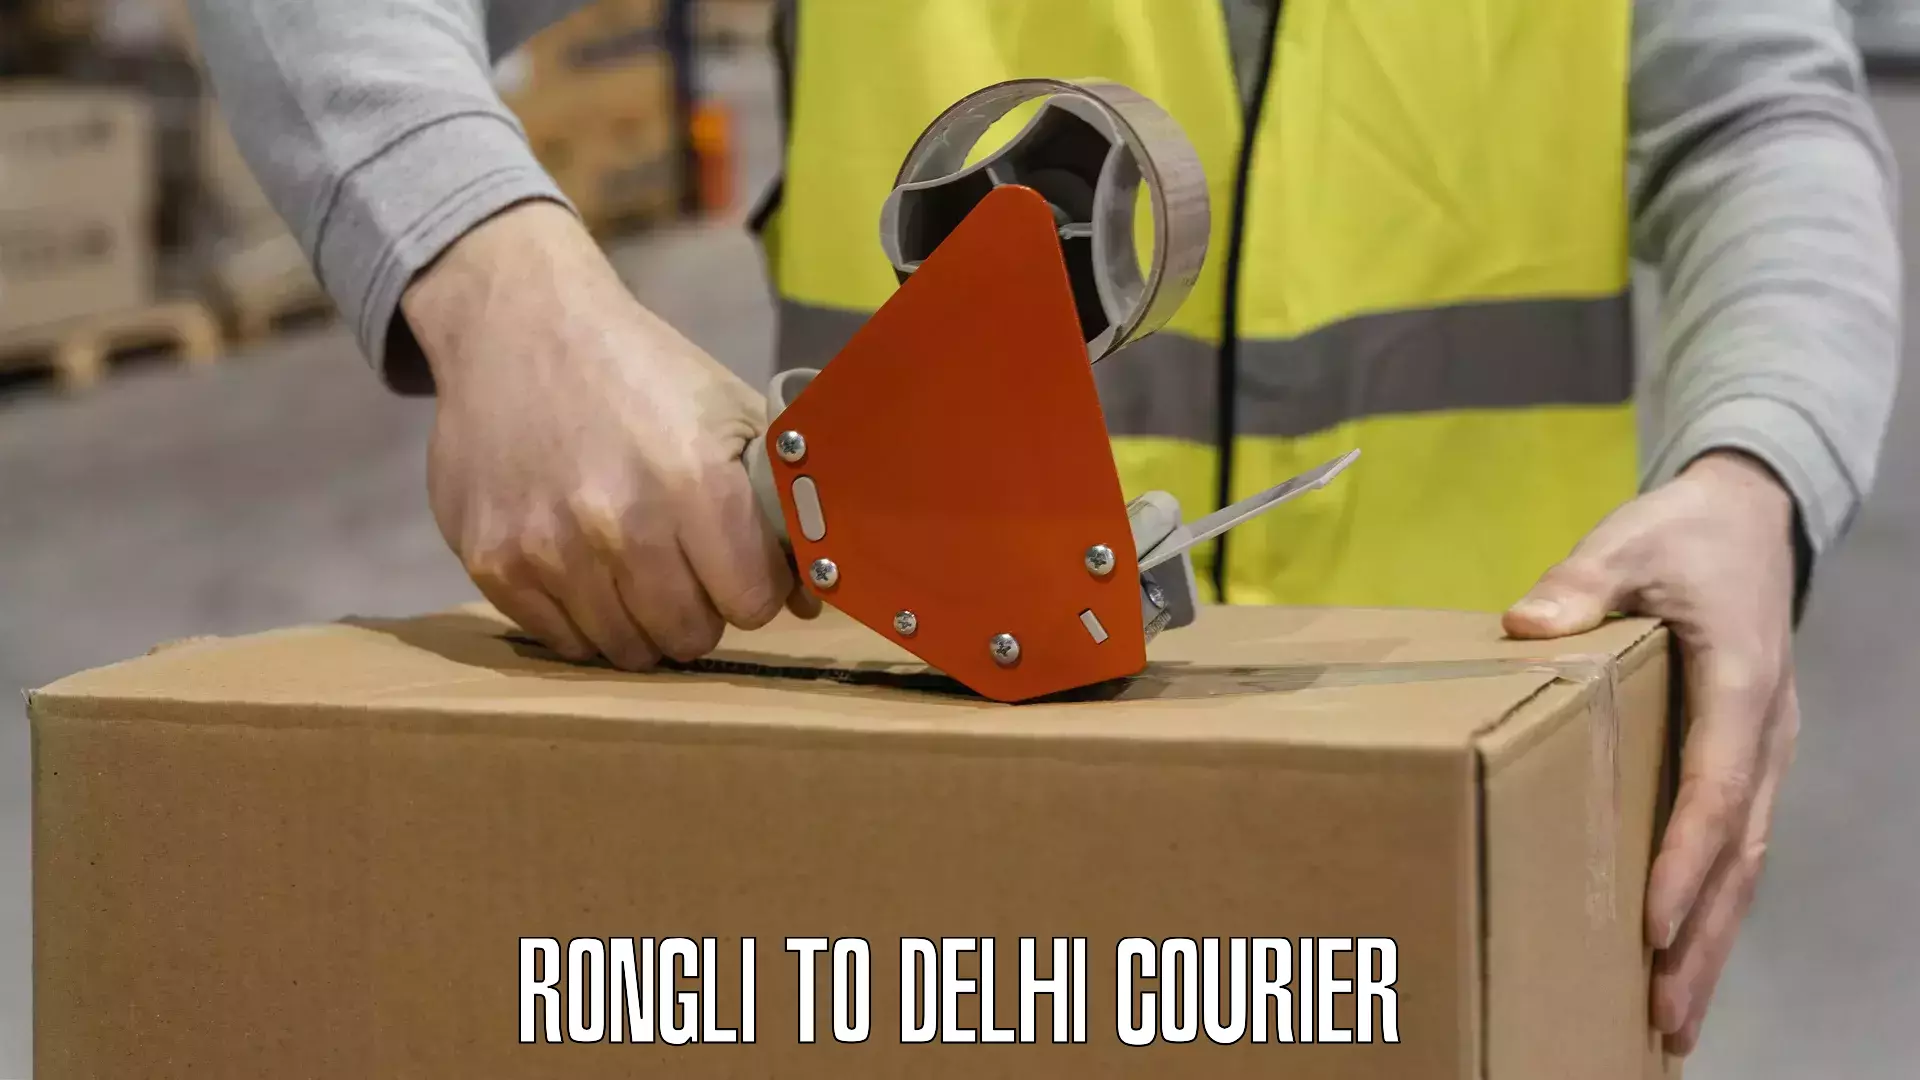 Track and trace shipping Rongli to NCR